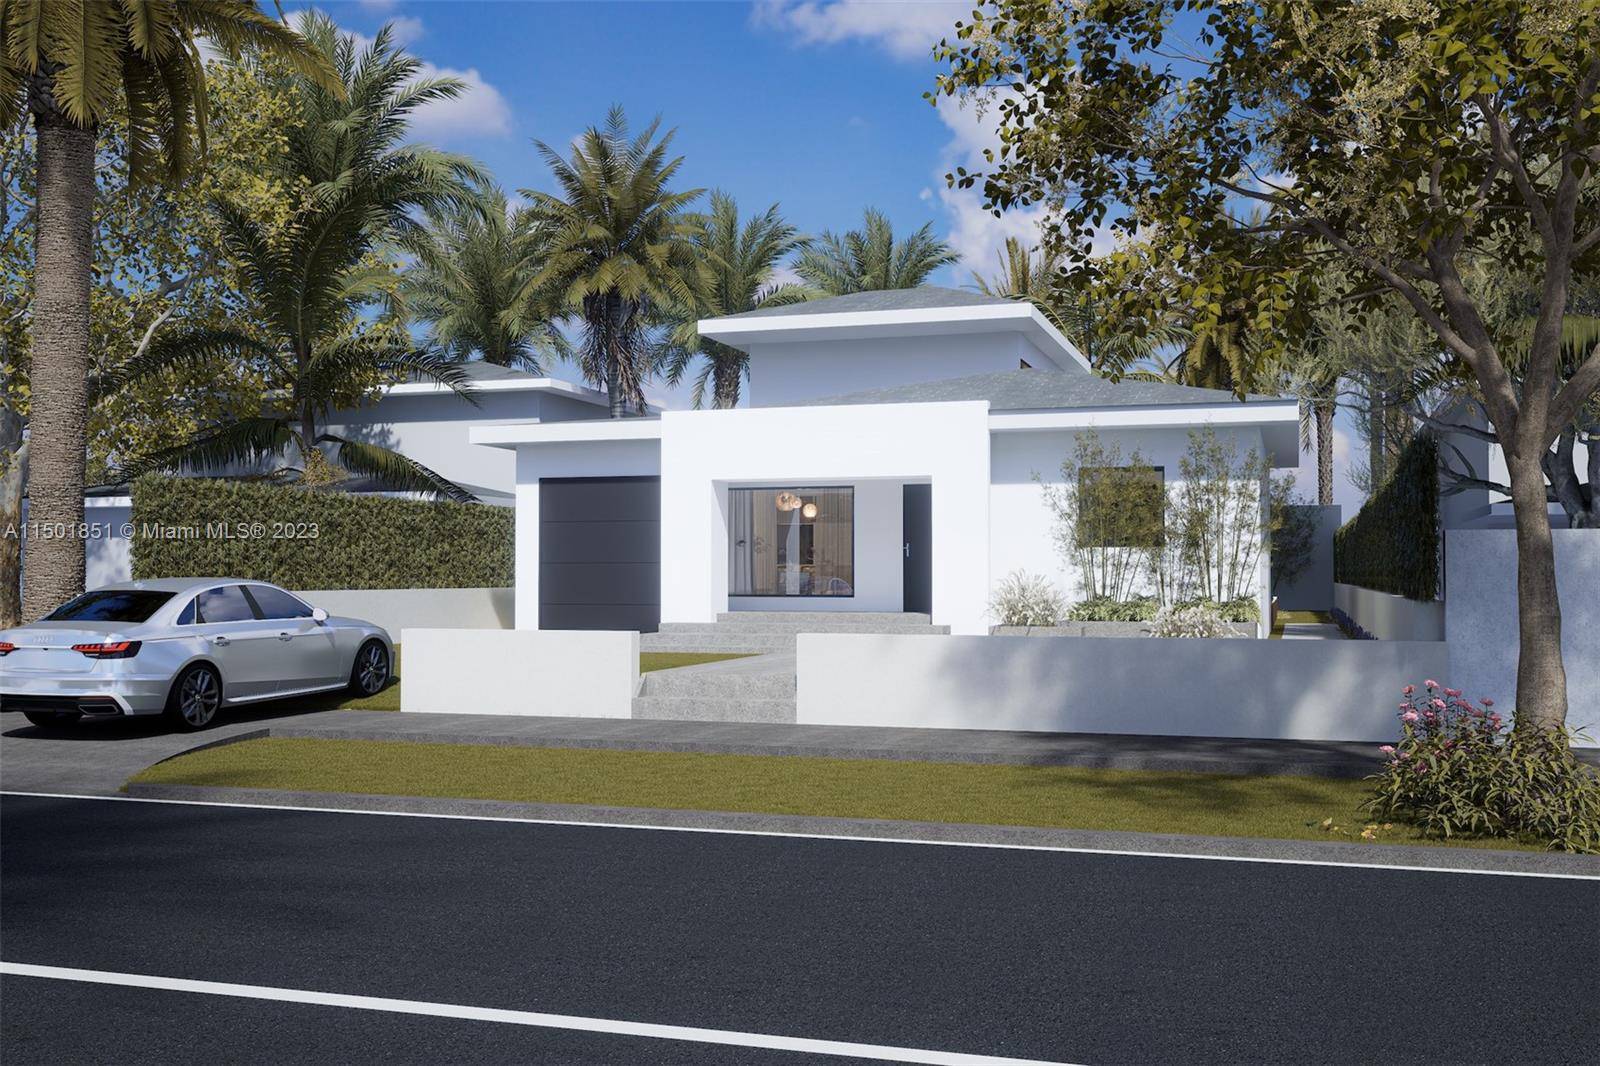 Experience luxury living in the ideally situated and quaint area of The Roads in this newly constructed smart home.